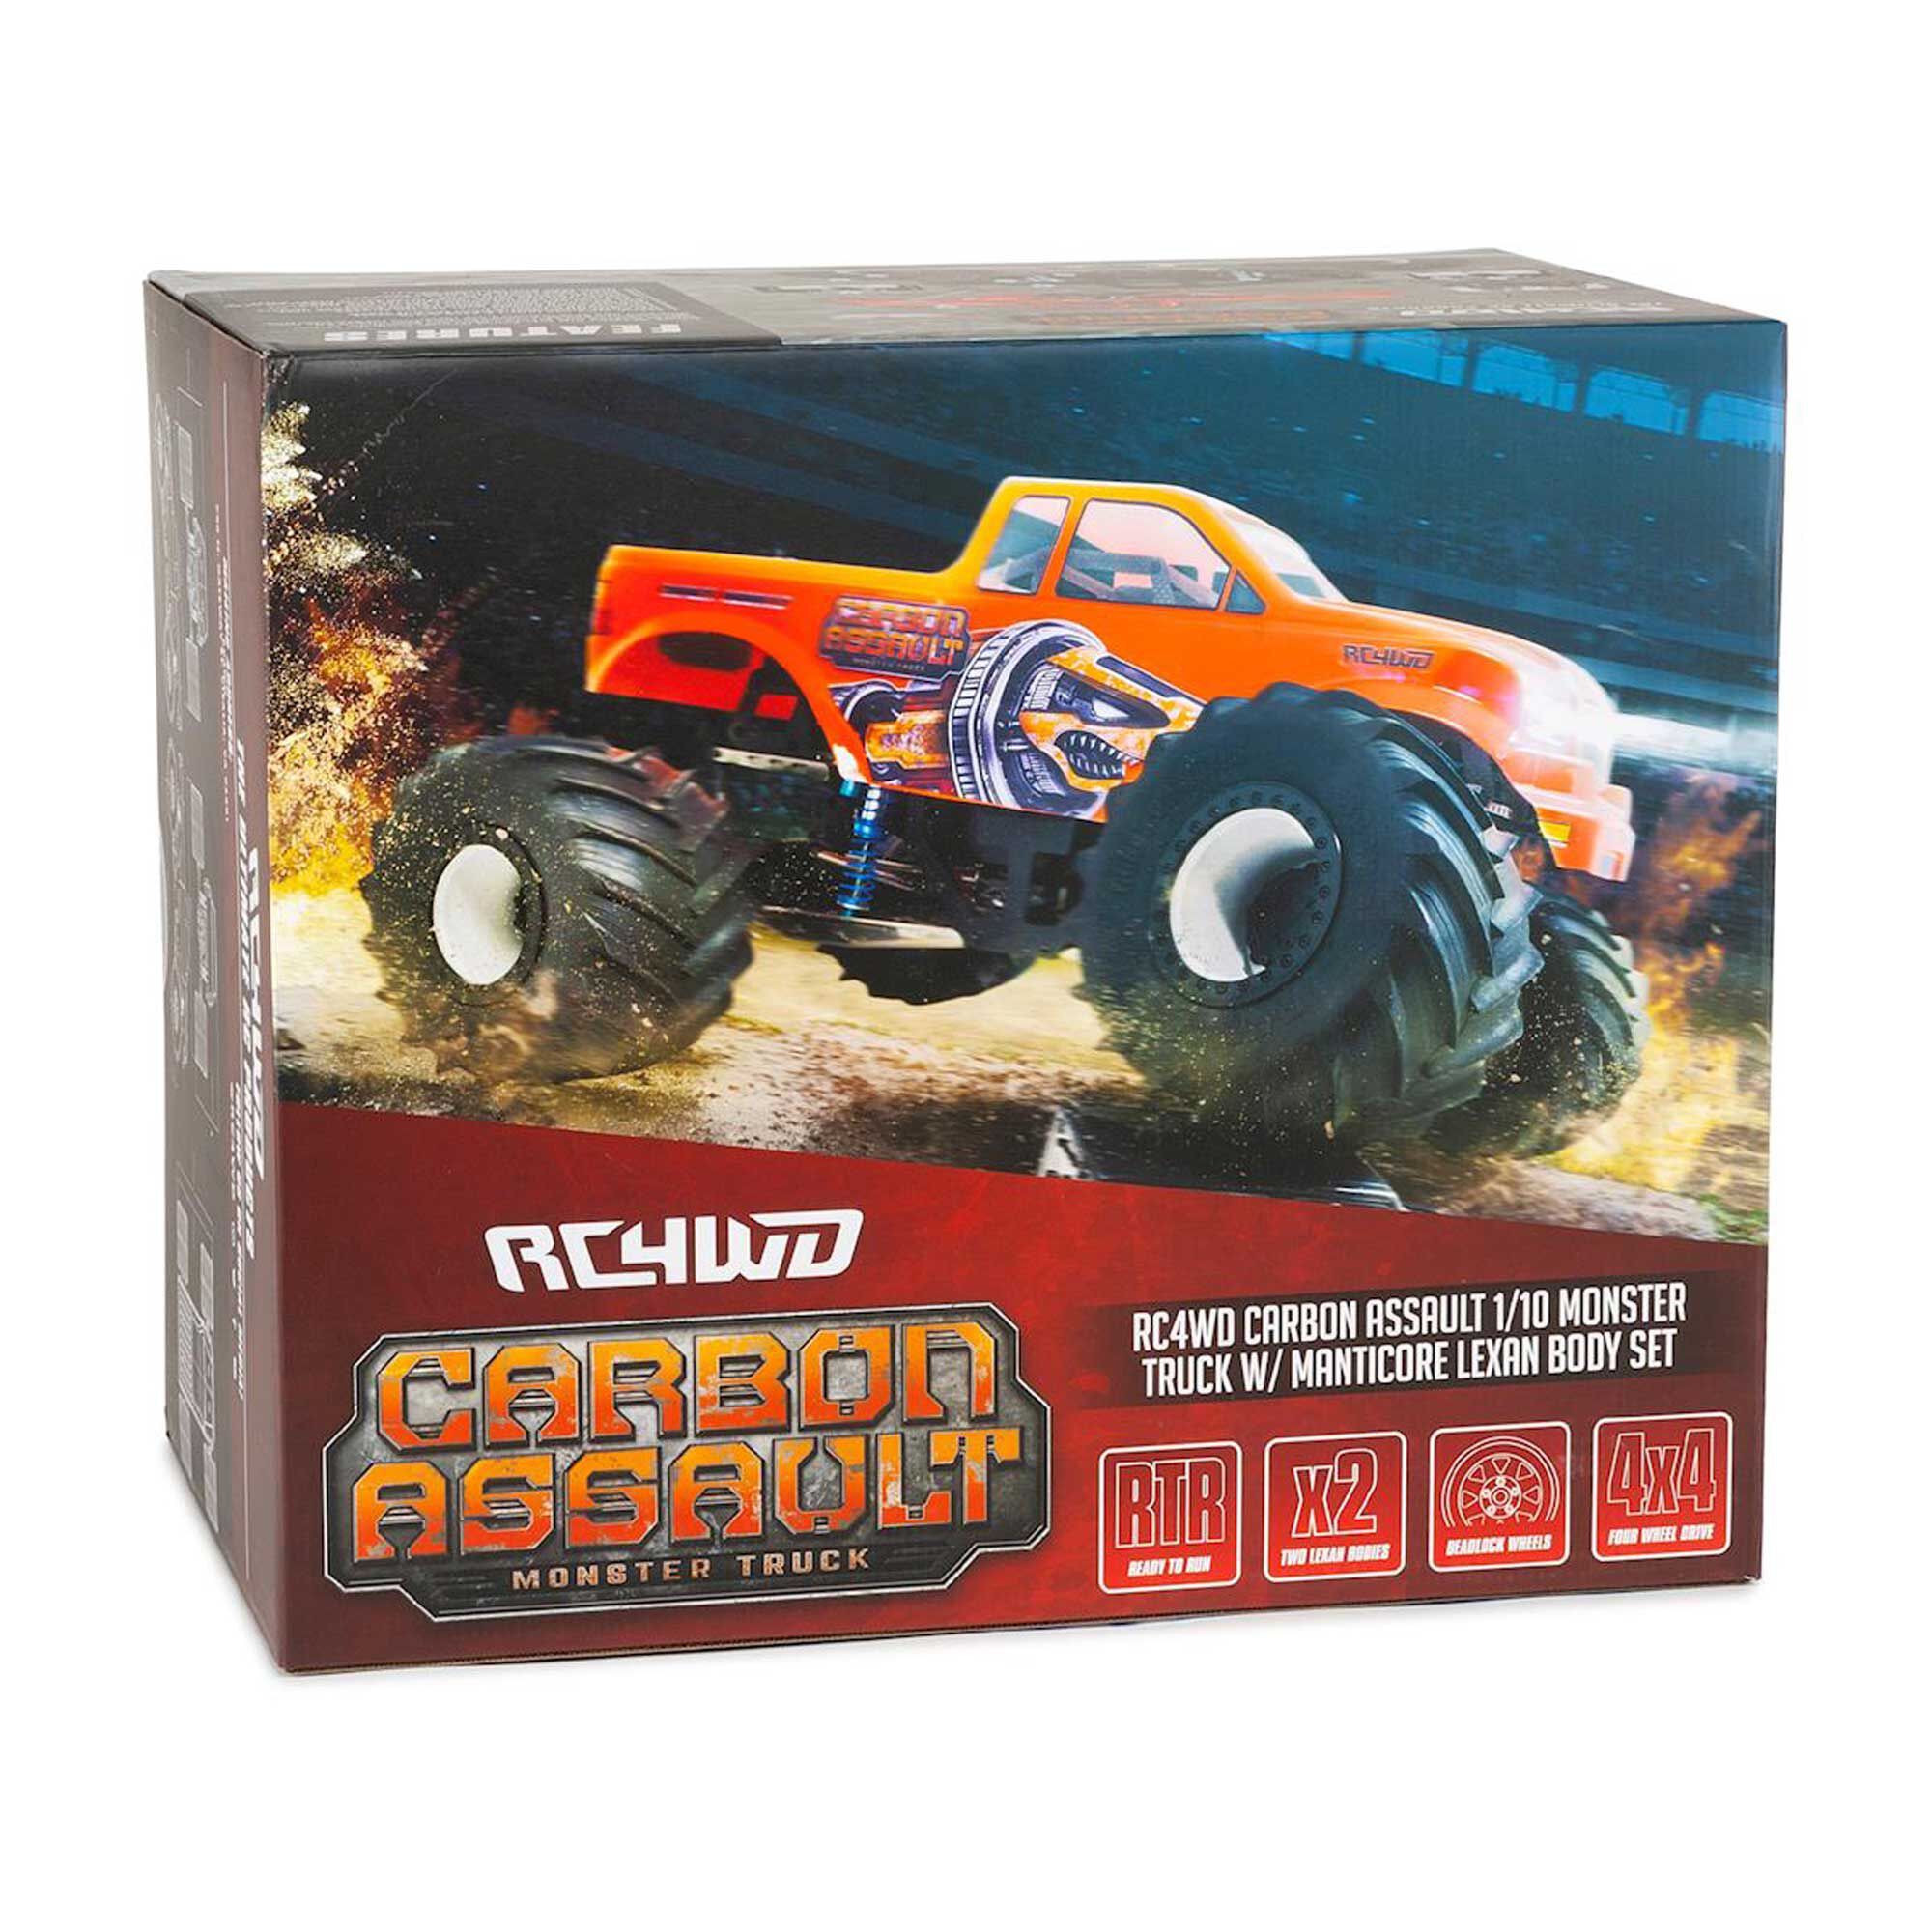 RC4WD RC4WD Carbon Assault 1/10th Monster Truck w/ Manticore Lexan Body Set 